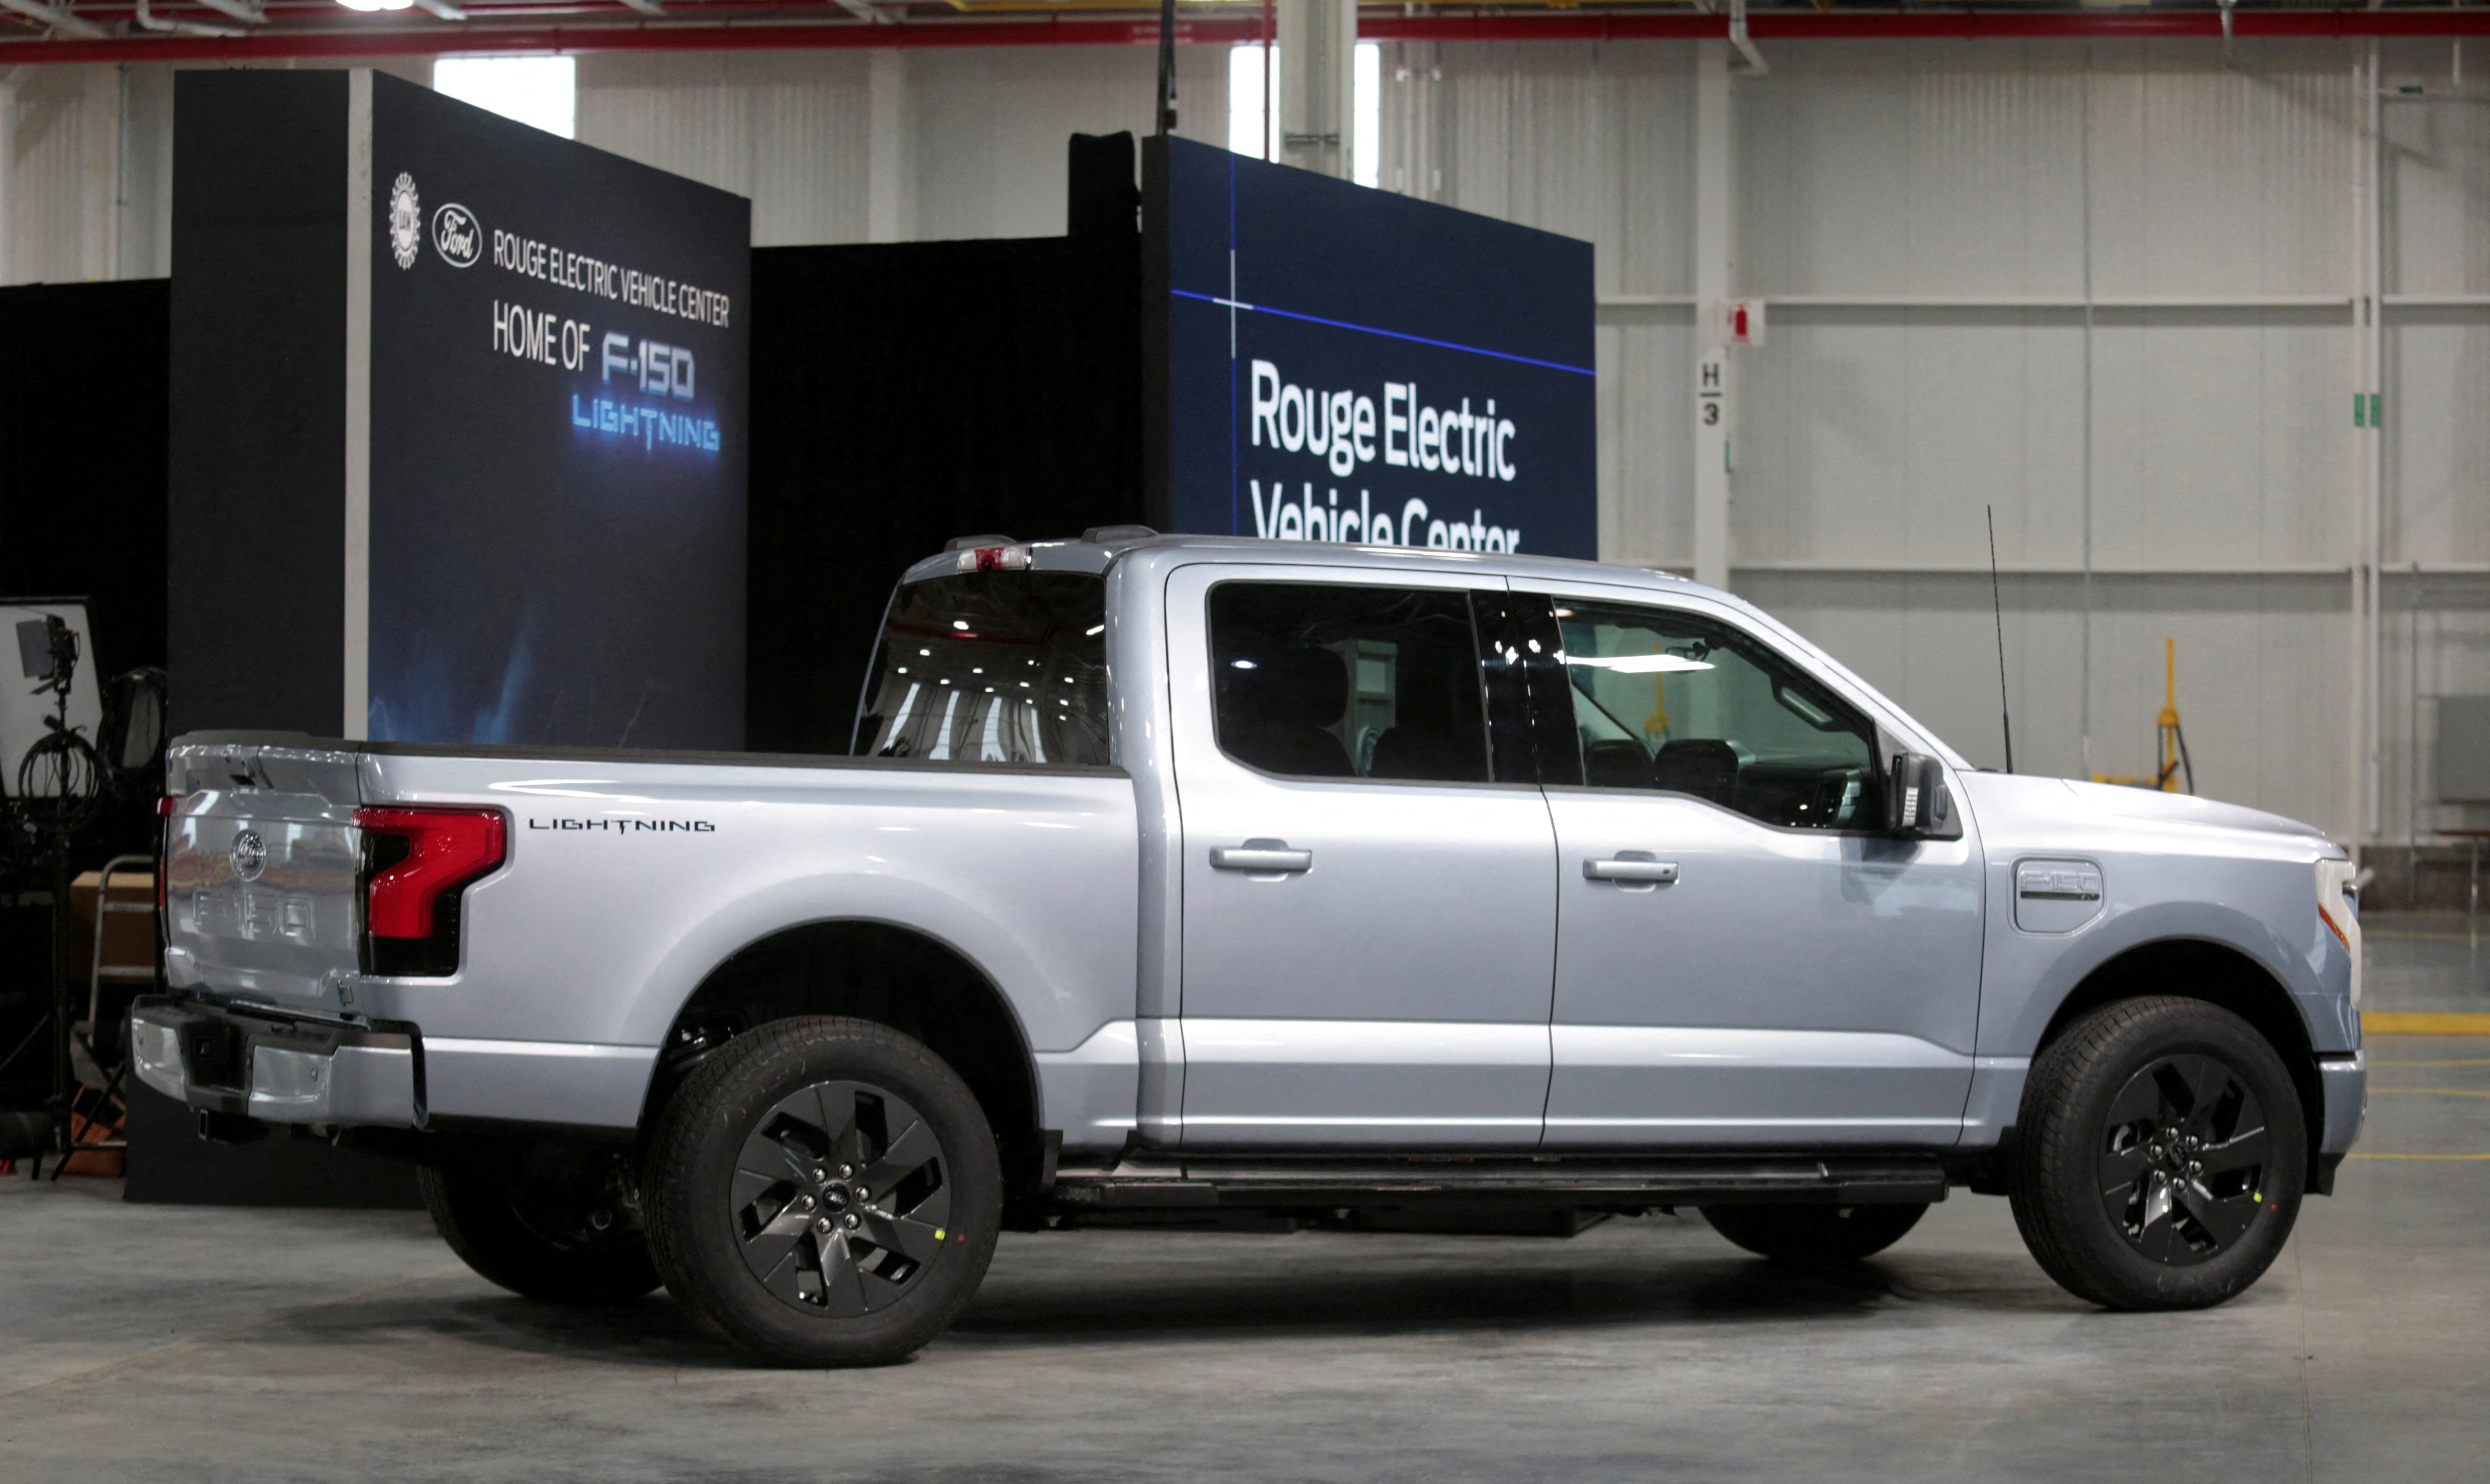 FILE PHOTO: Ford Motors pre-production all-electric F-150 Lightning truck prototype